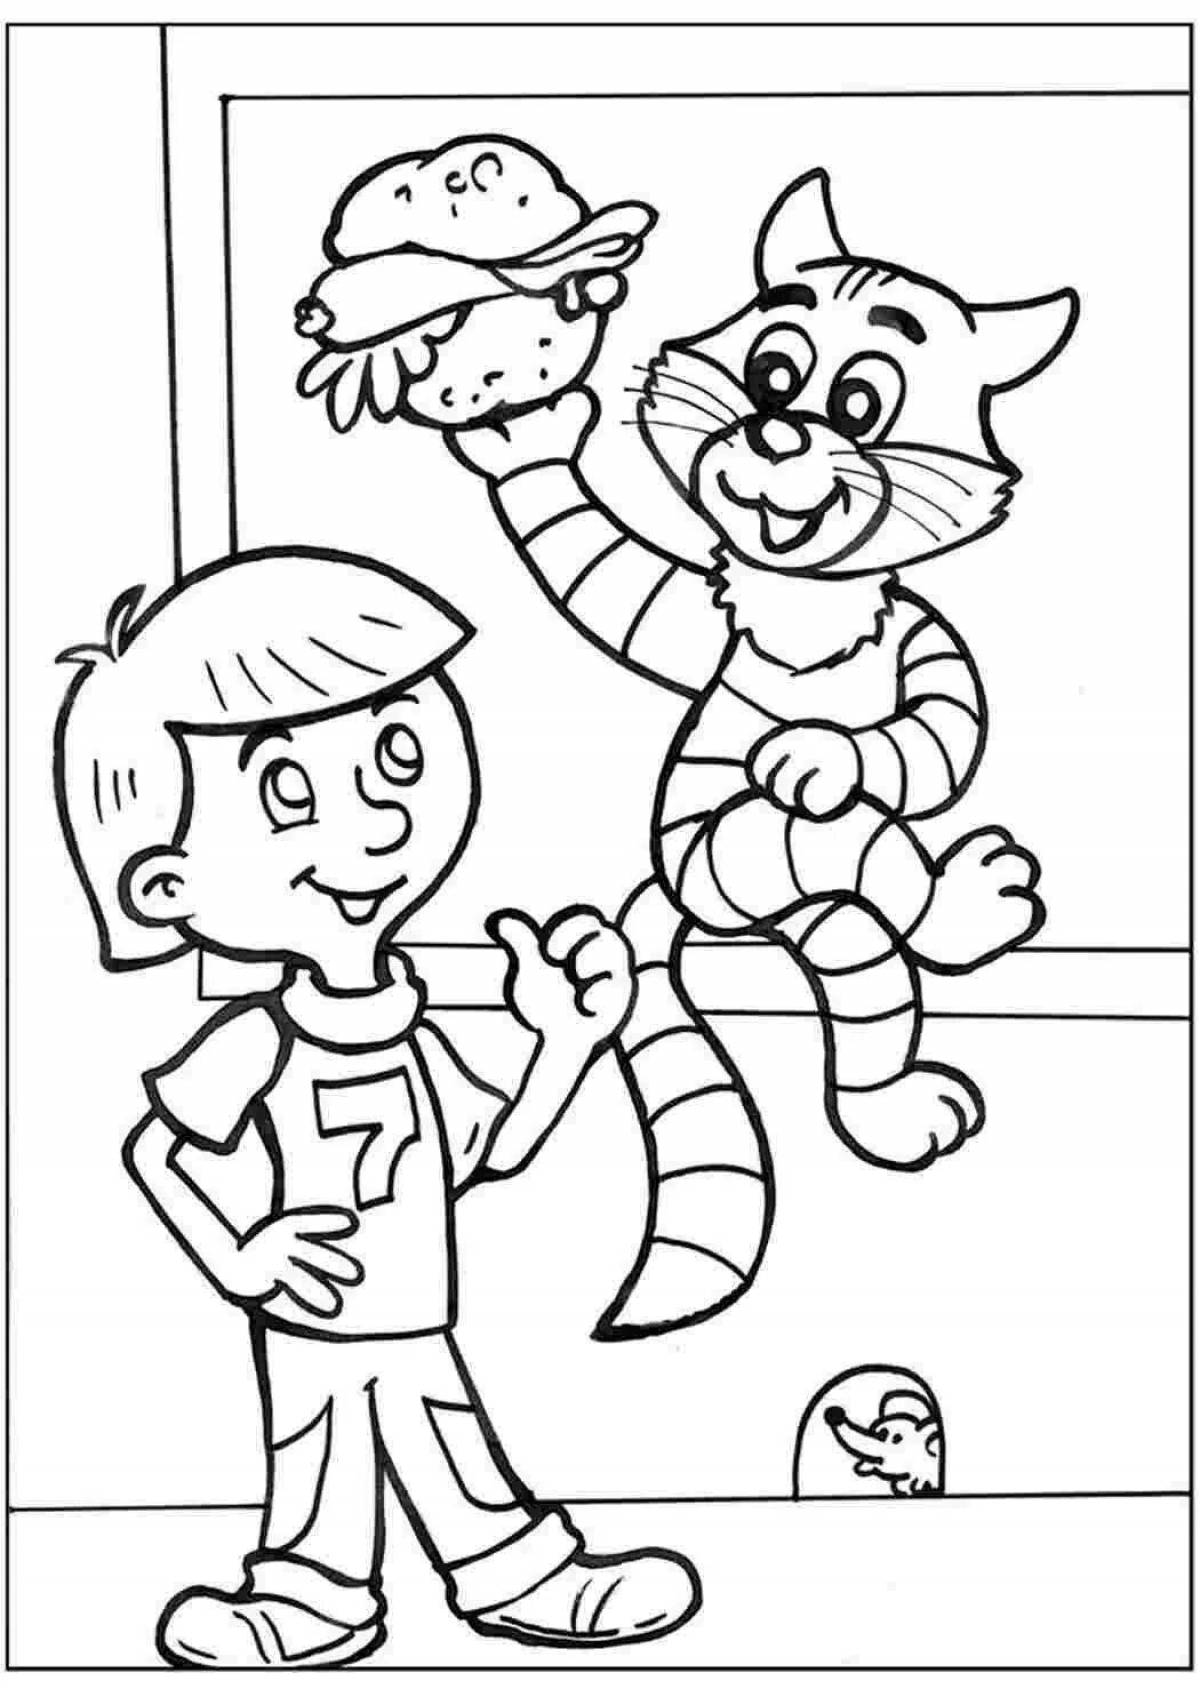 Entertaining coloring book for children 5-6 years old